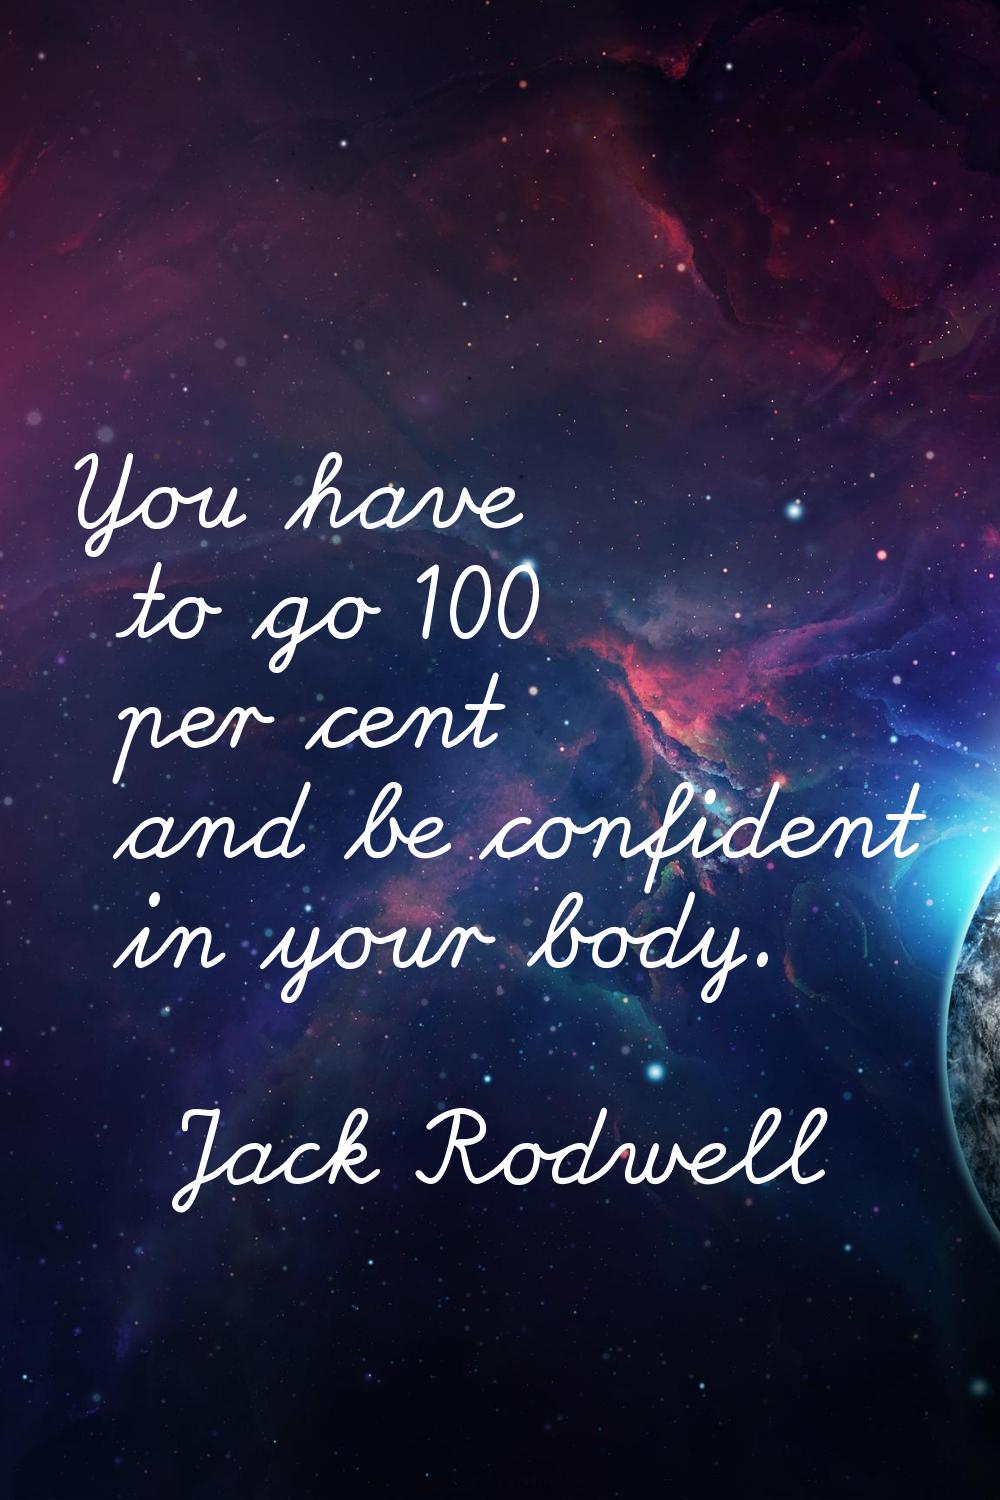 You have to go 100 per cent and be confident in your body.